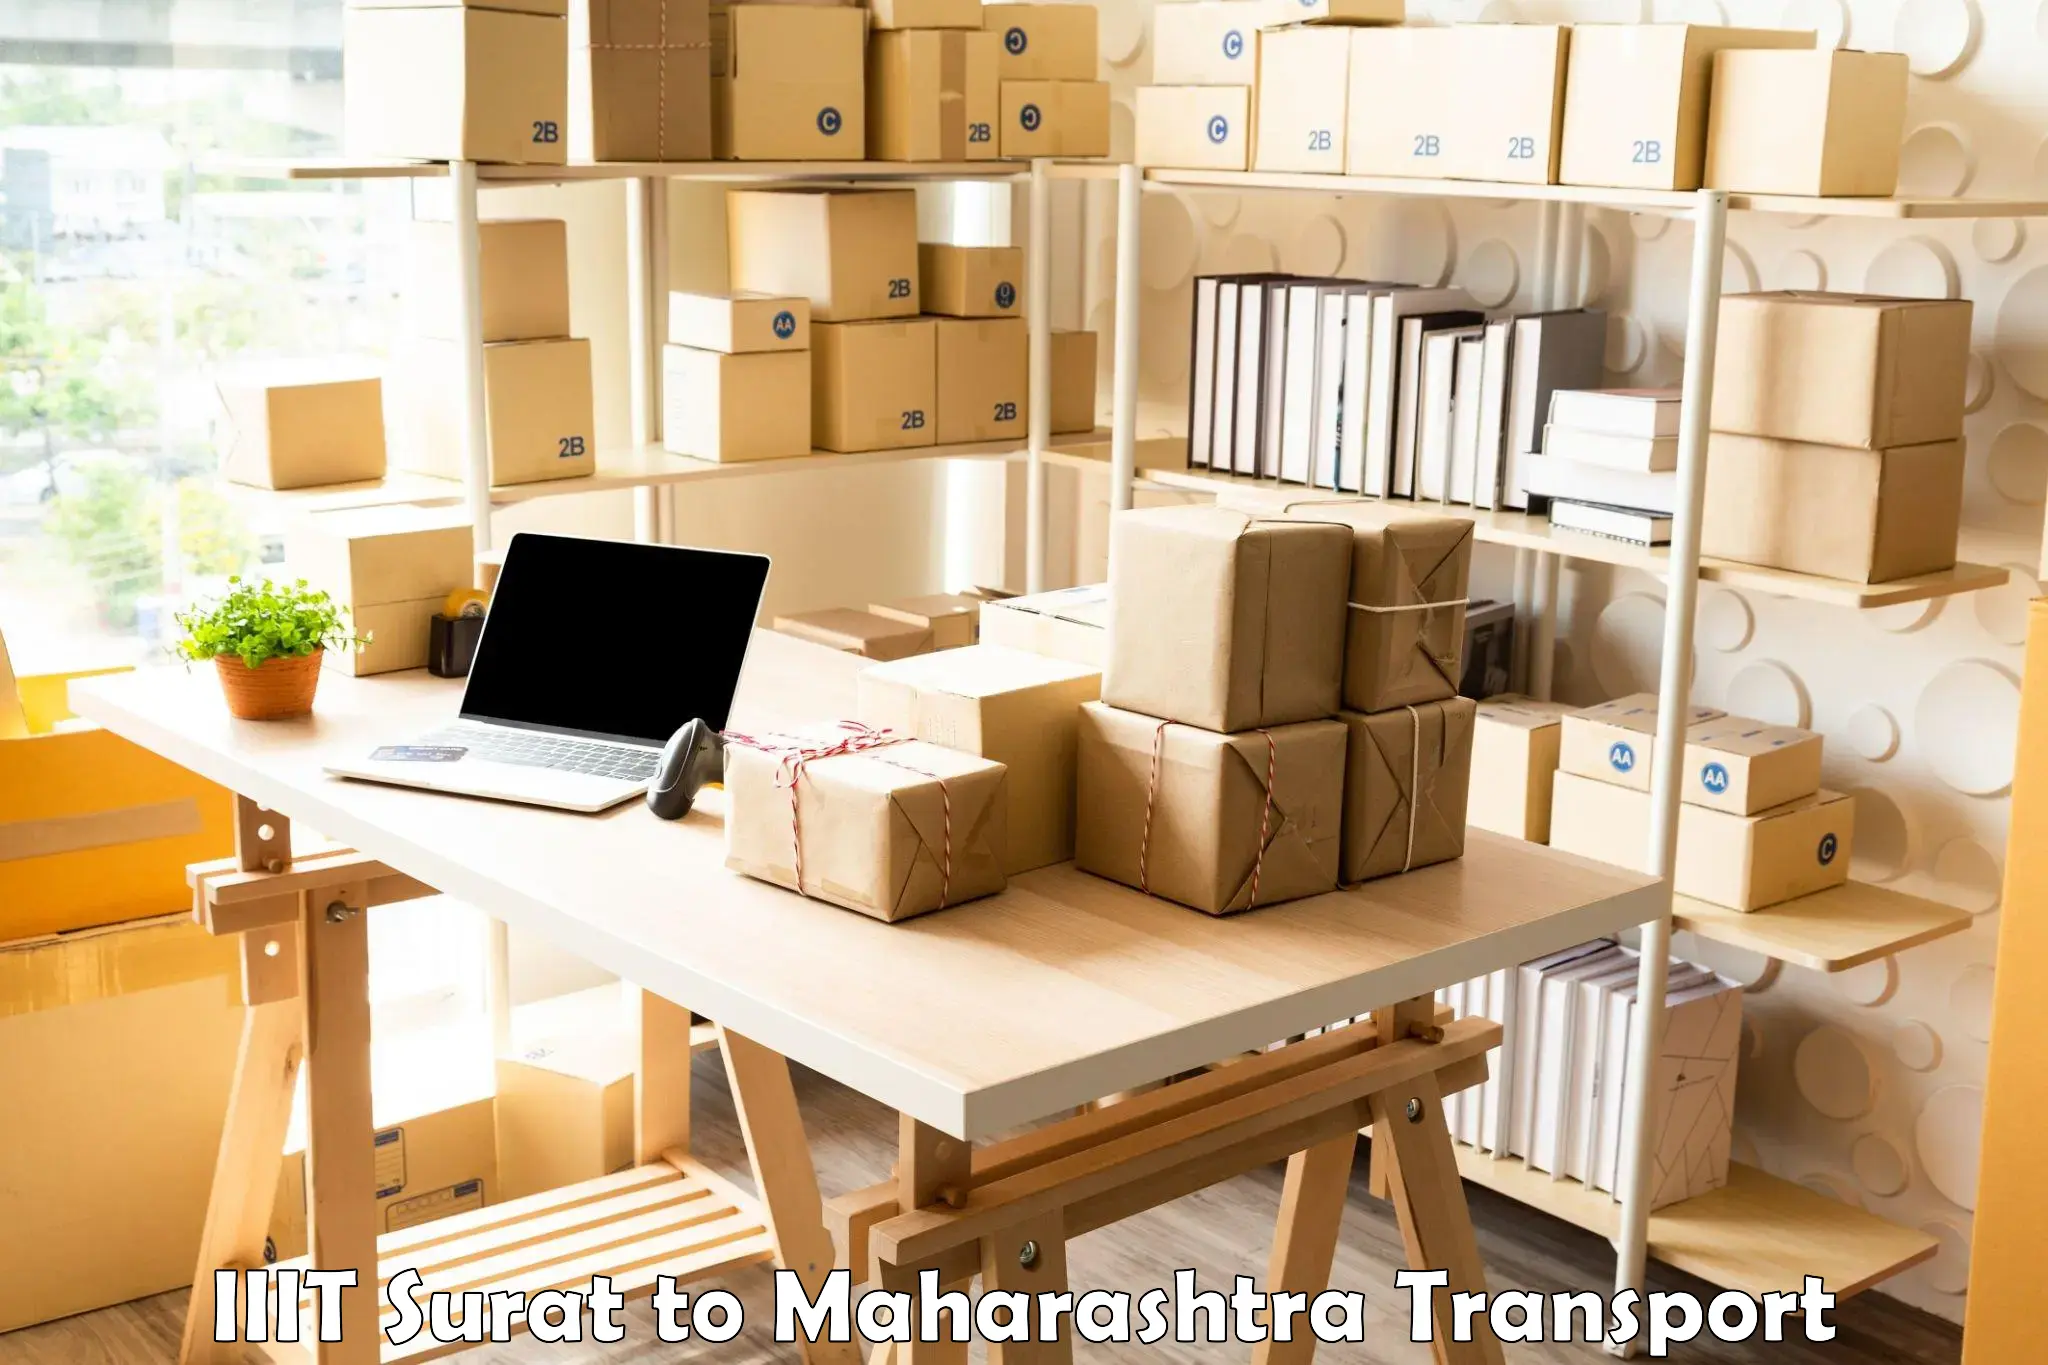 Cargo transport services IIIT Surat to Dhule